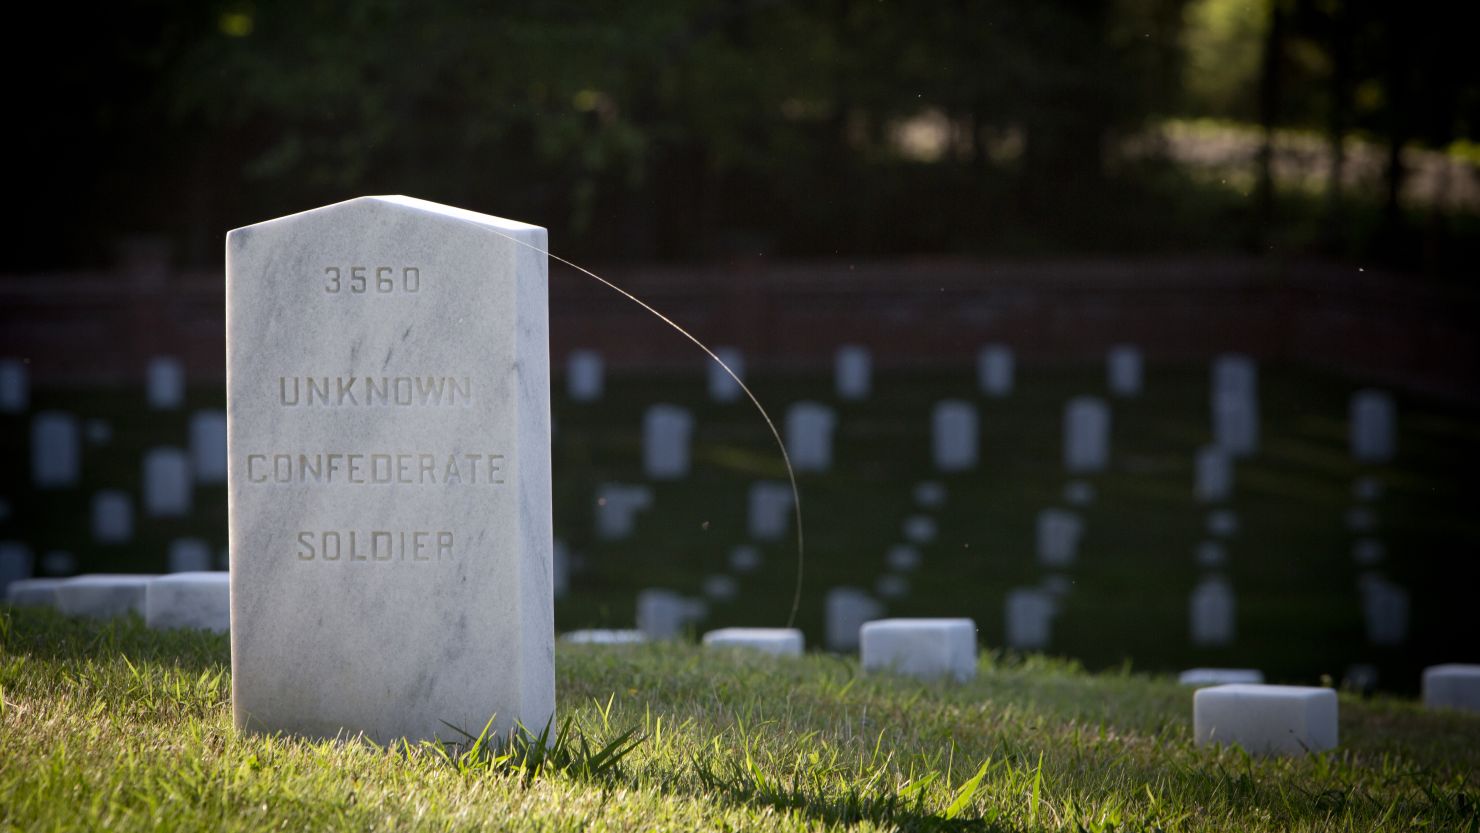 Petersburg, VA - April 26: A few Confederate soldiers are buried at Poplar Grove National Cemetery, their grave markers are distinguished by a pointed, instead of rounded, top. (Photo by Julia Rendleman for CNN)